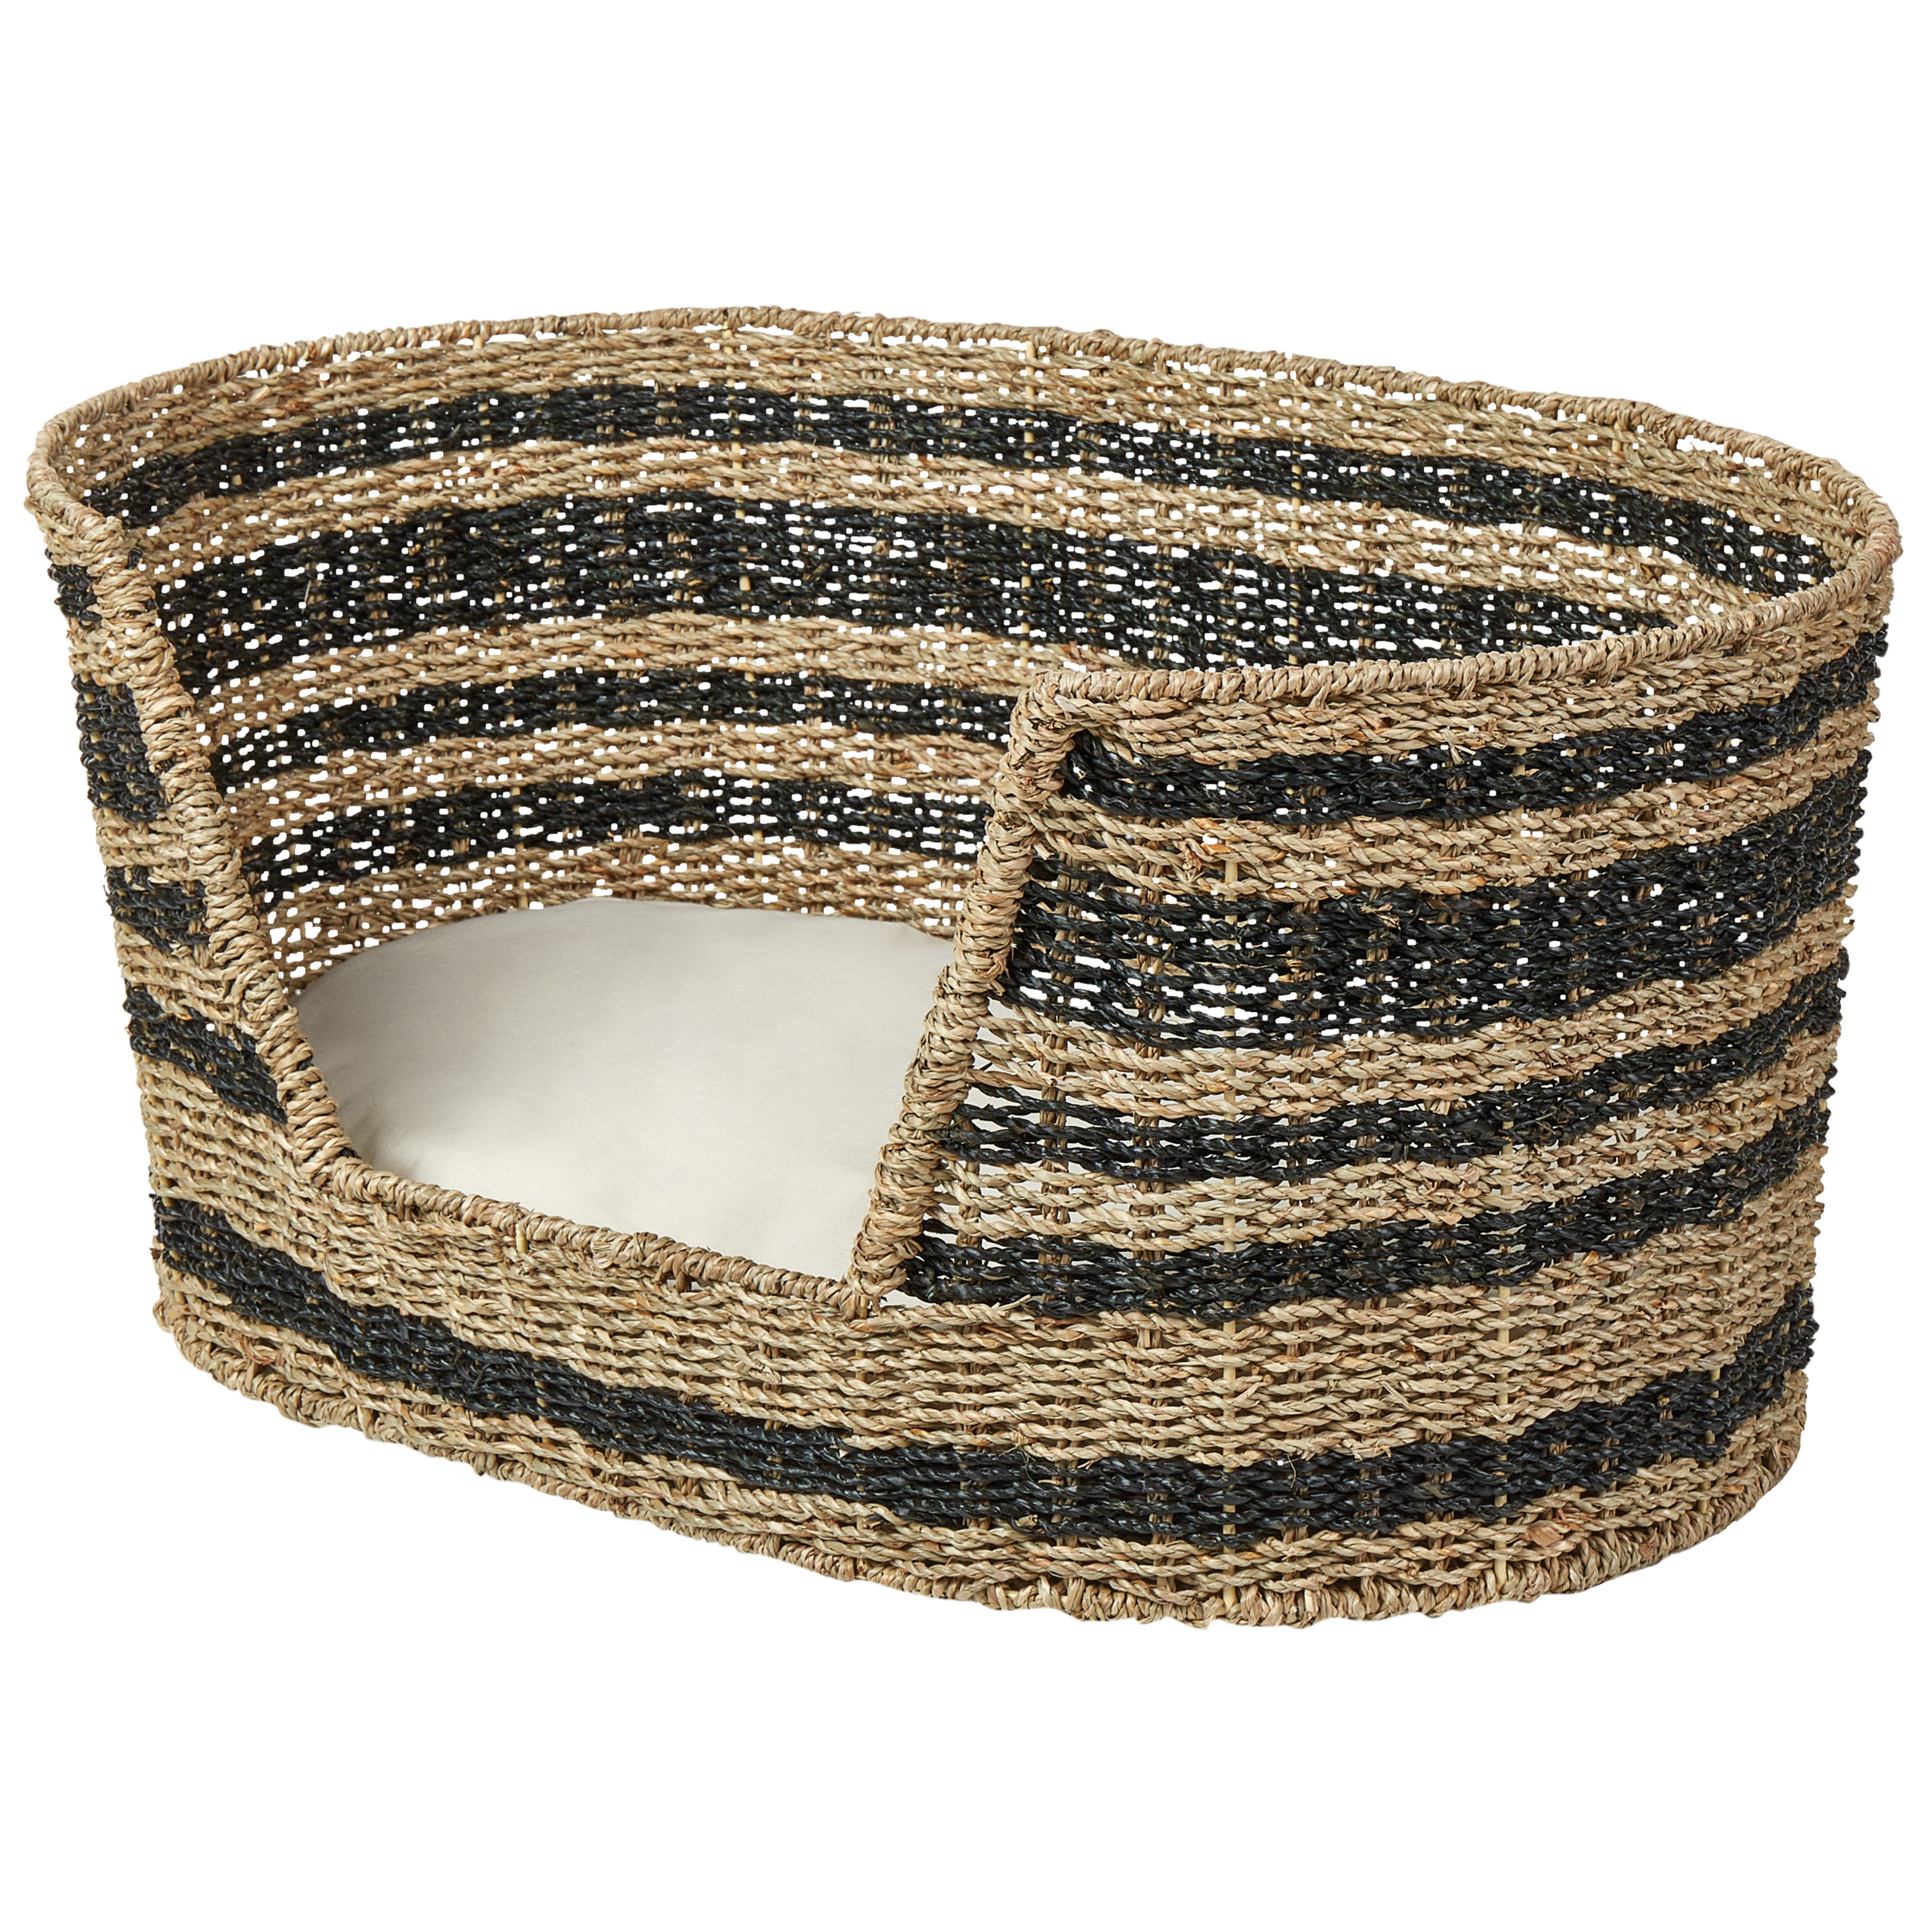 Beliani Pet Basket Natural Black Seagrass 65 x 44 cm with Cotton Cushion Bed for Cat Dog Boho Material:Seagrass Size:44x31x65